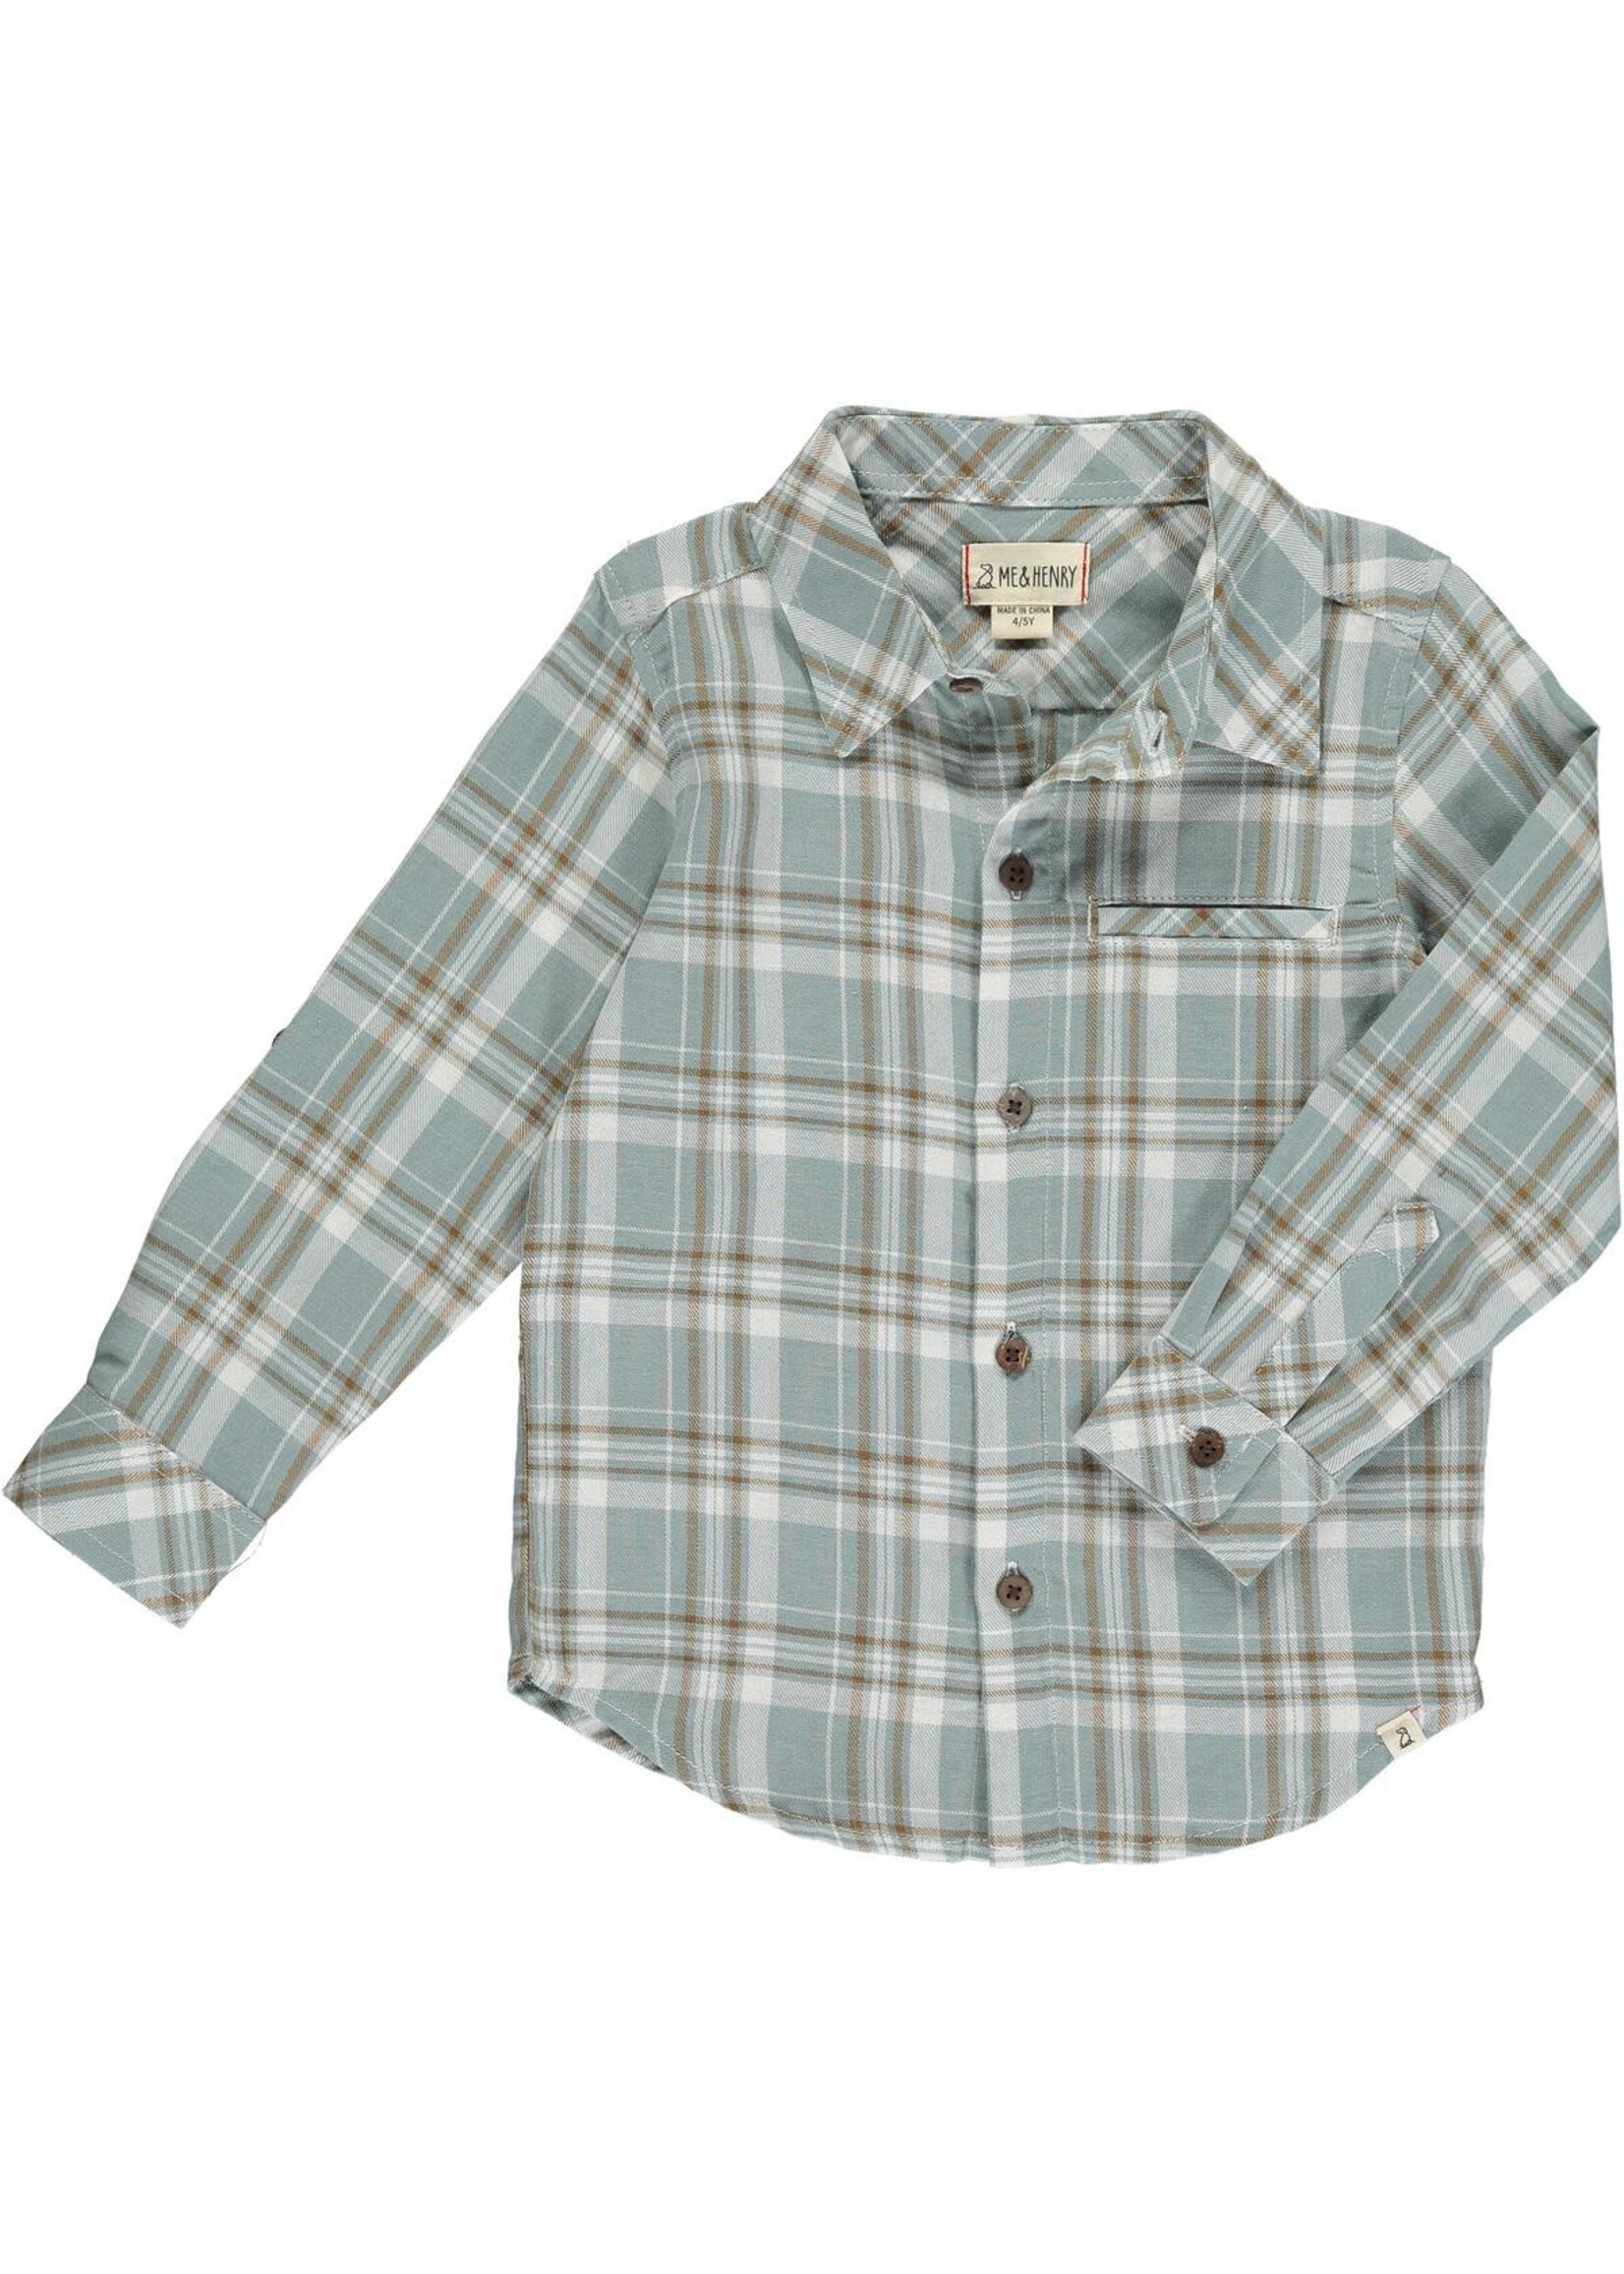 Me & Henry Atwood Woven Shirt Blue / White Plaid